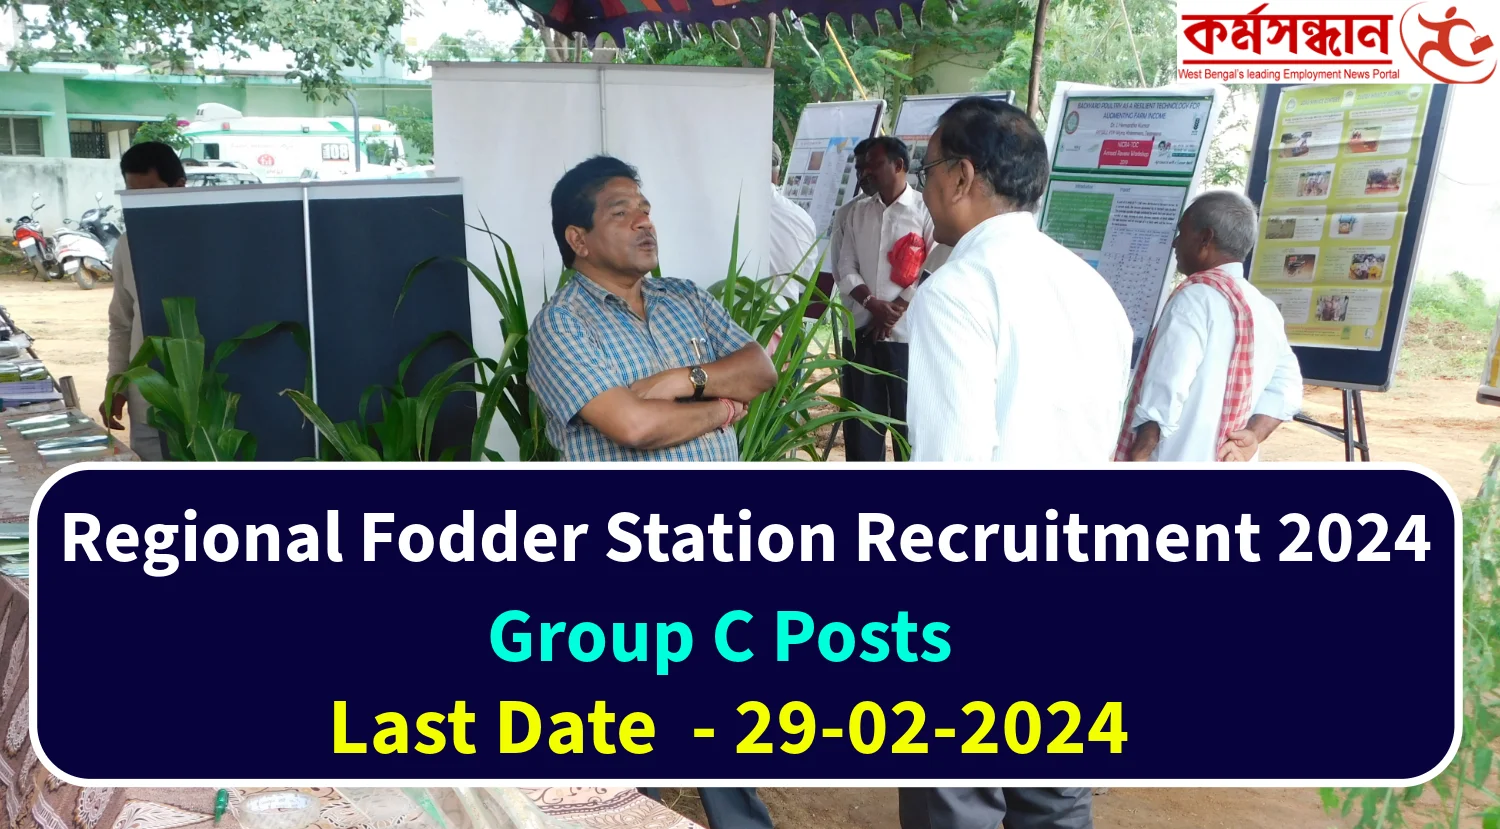 Regional Fodder Station Group C Recruitment 2024 Notification out